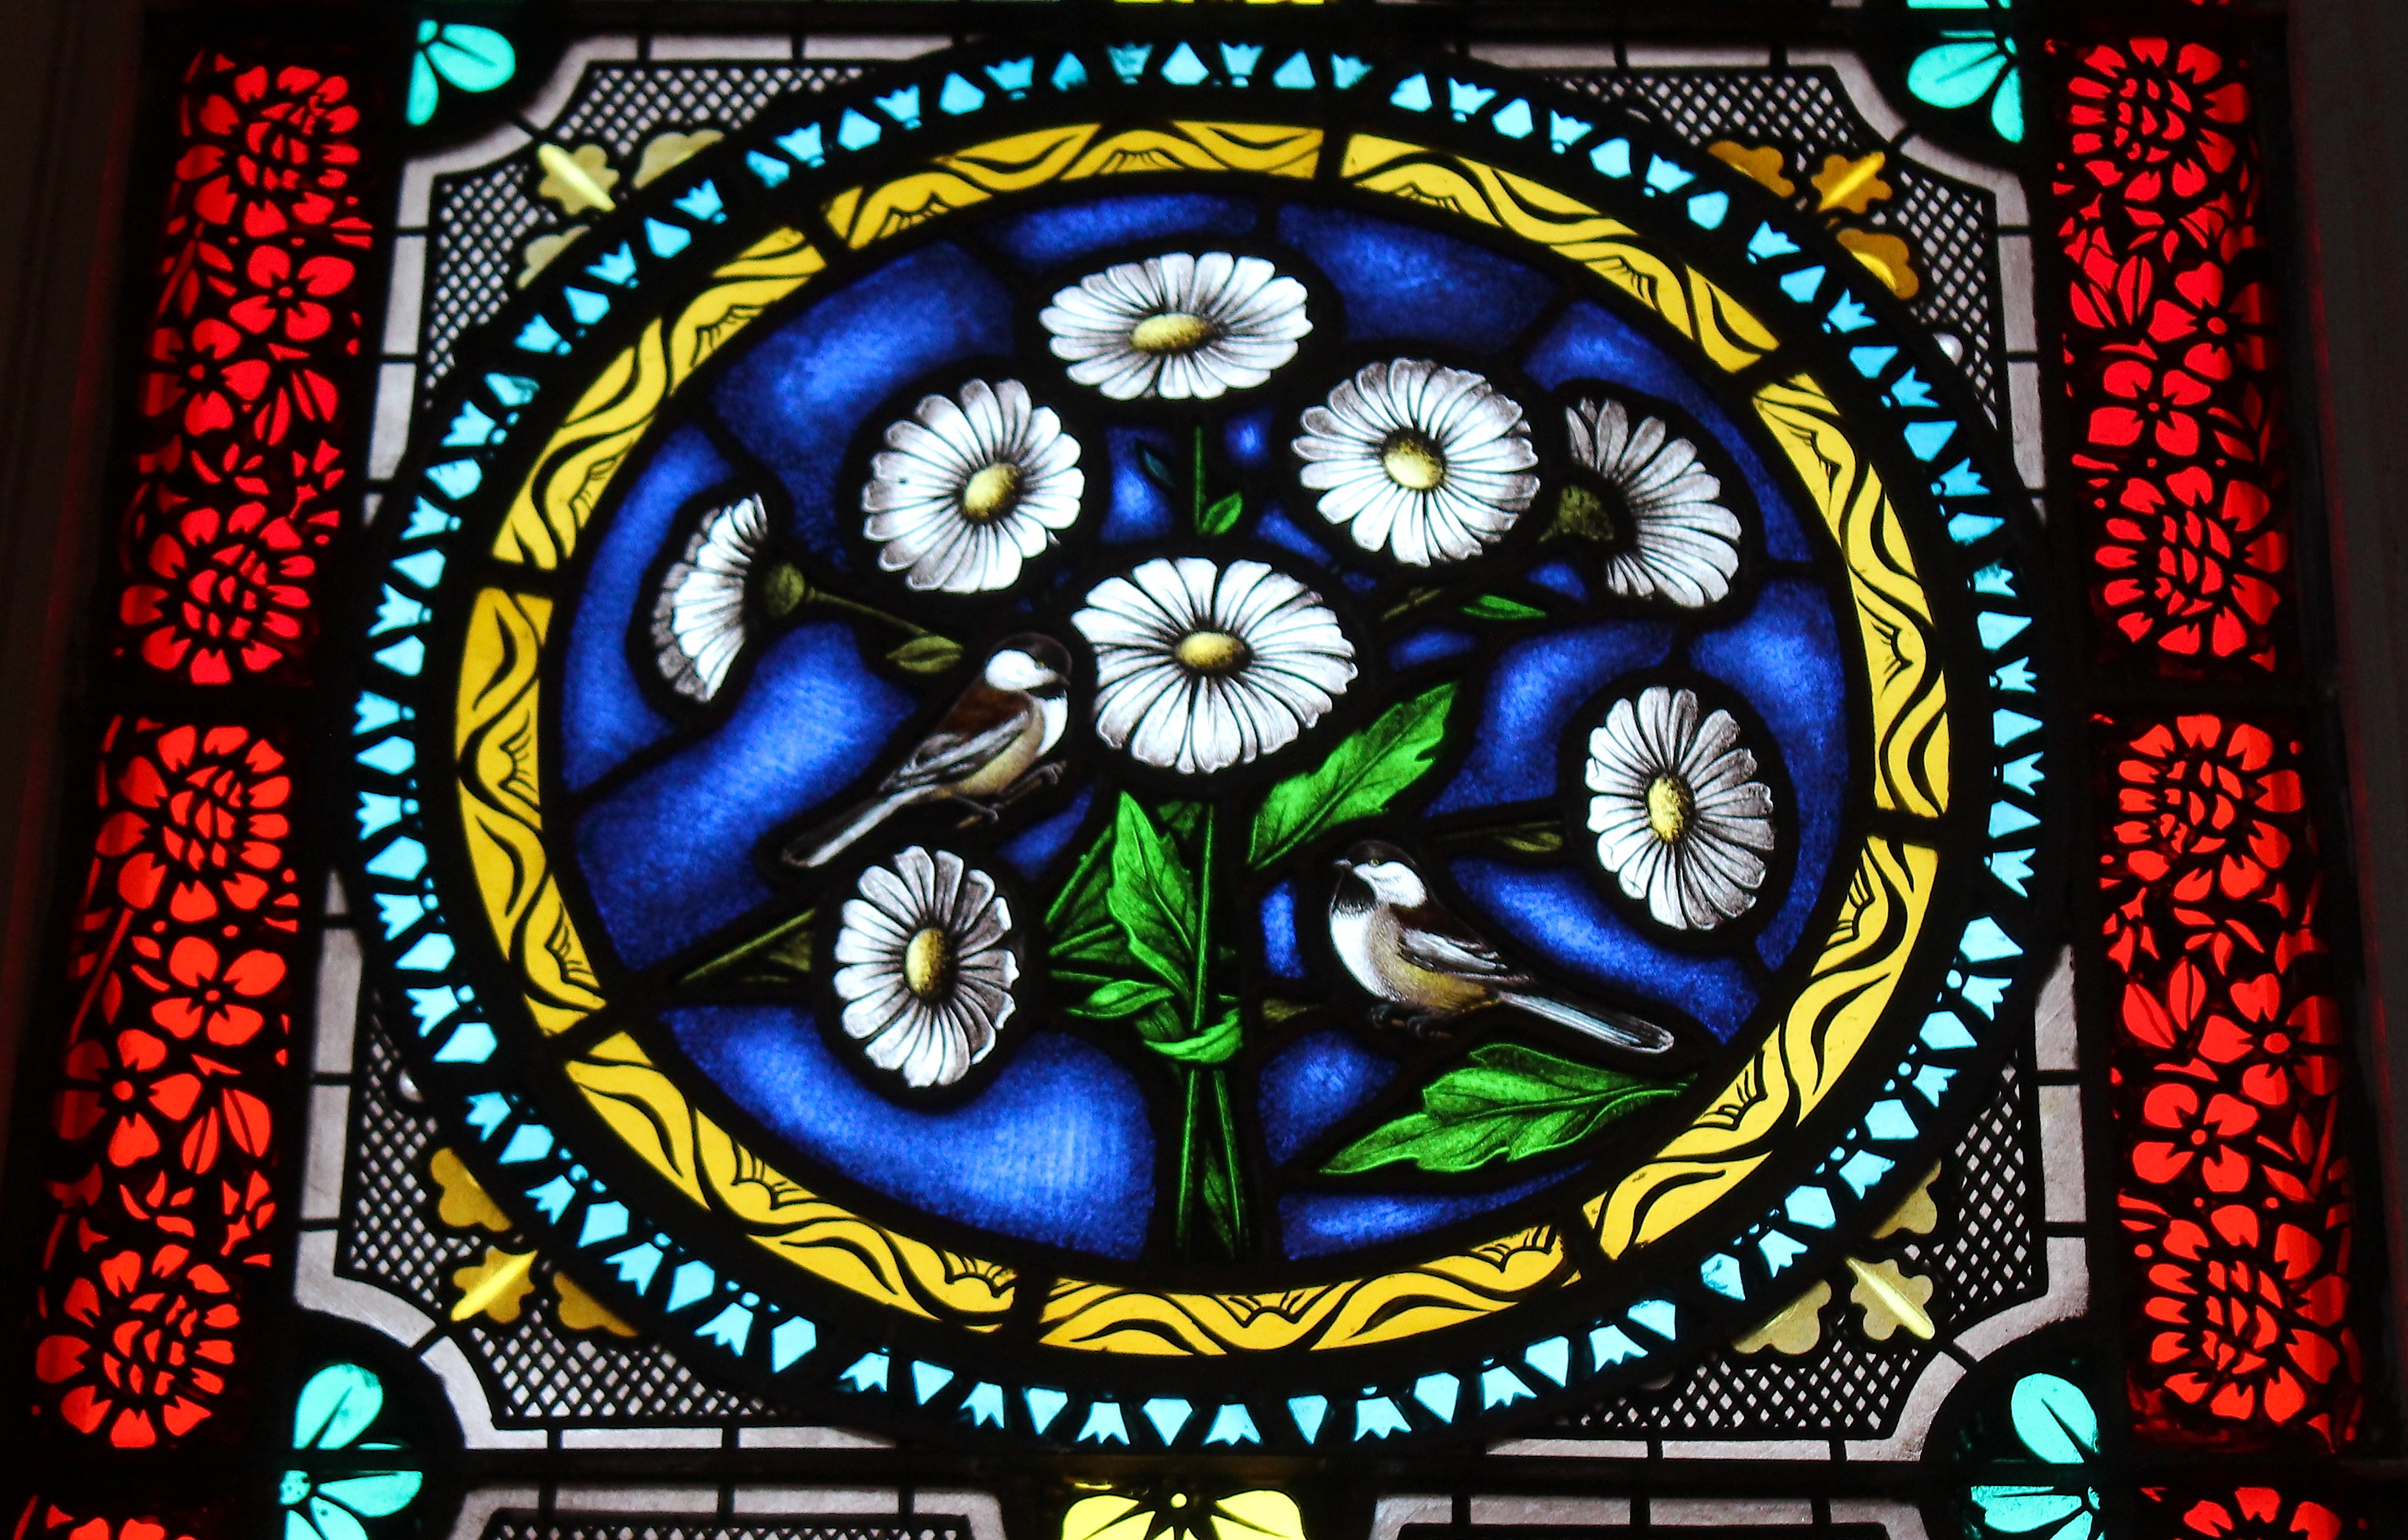 A stained glass window of white daisies and 2 small sparrows